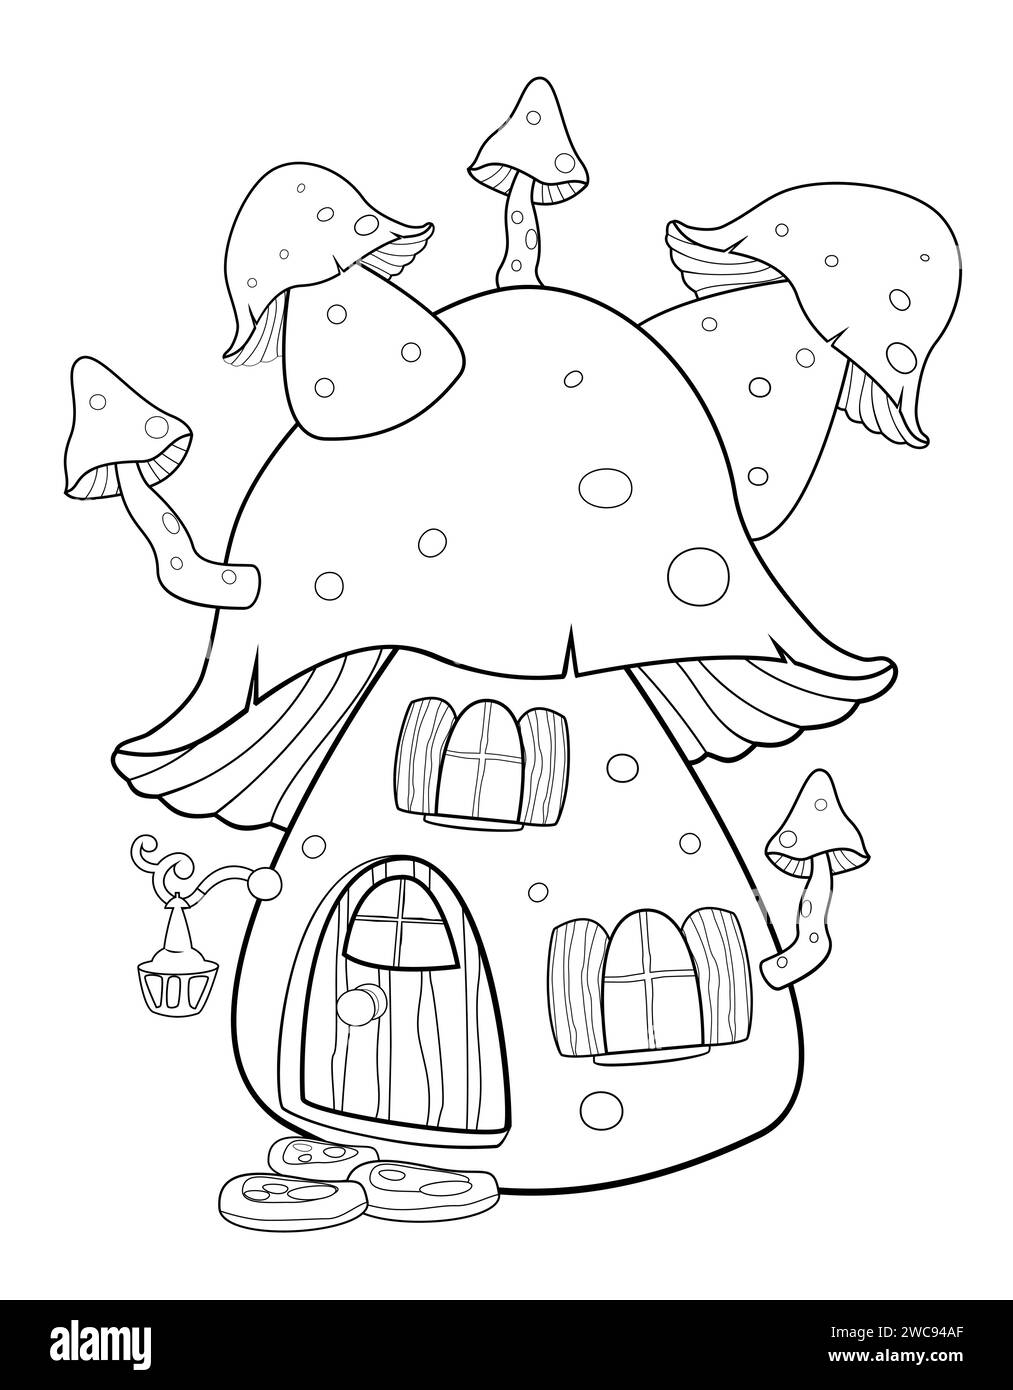 Cartoon fantasy mushroom house. Little fairy house. Sketch in contours for coloring. Stock Vector